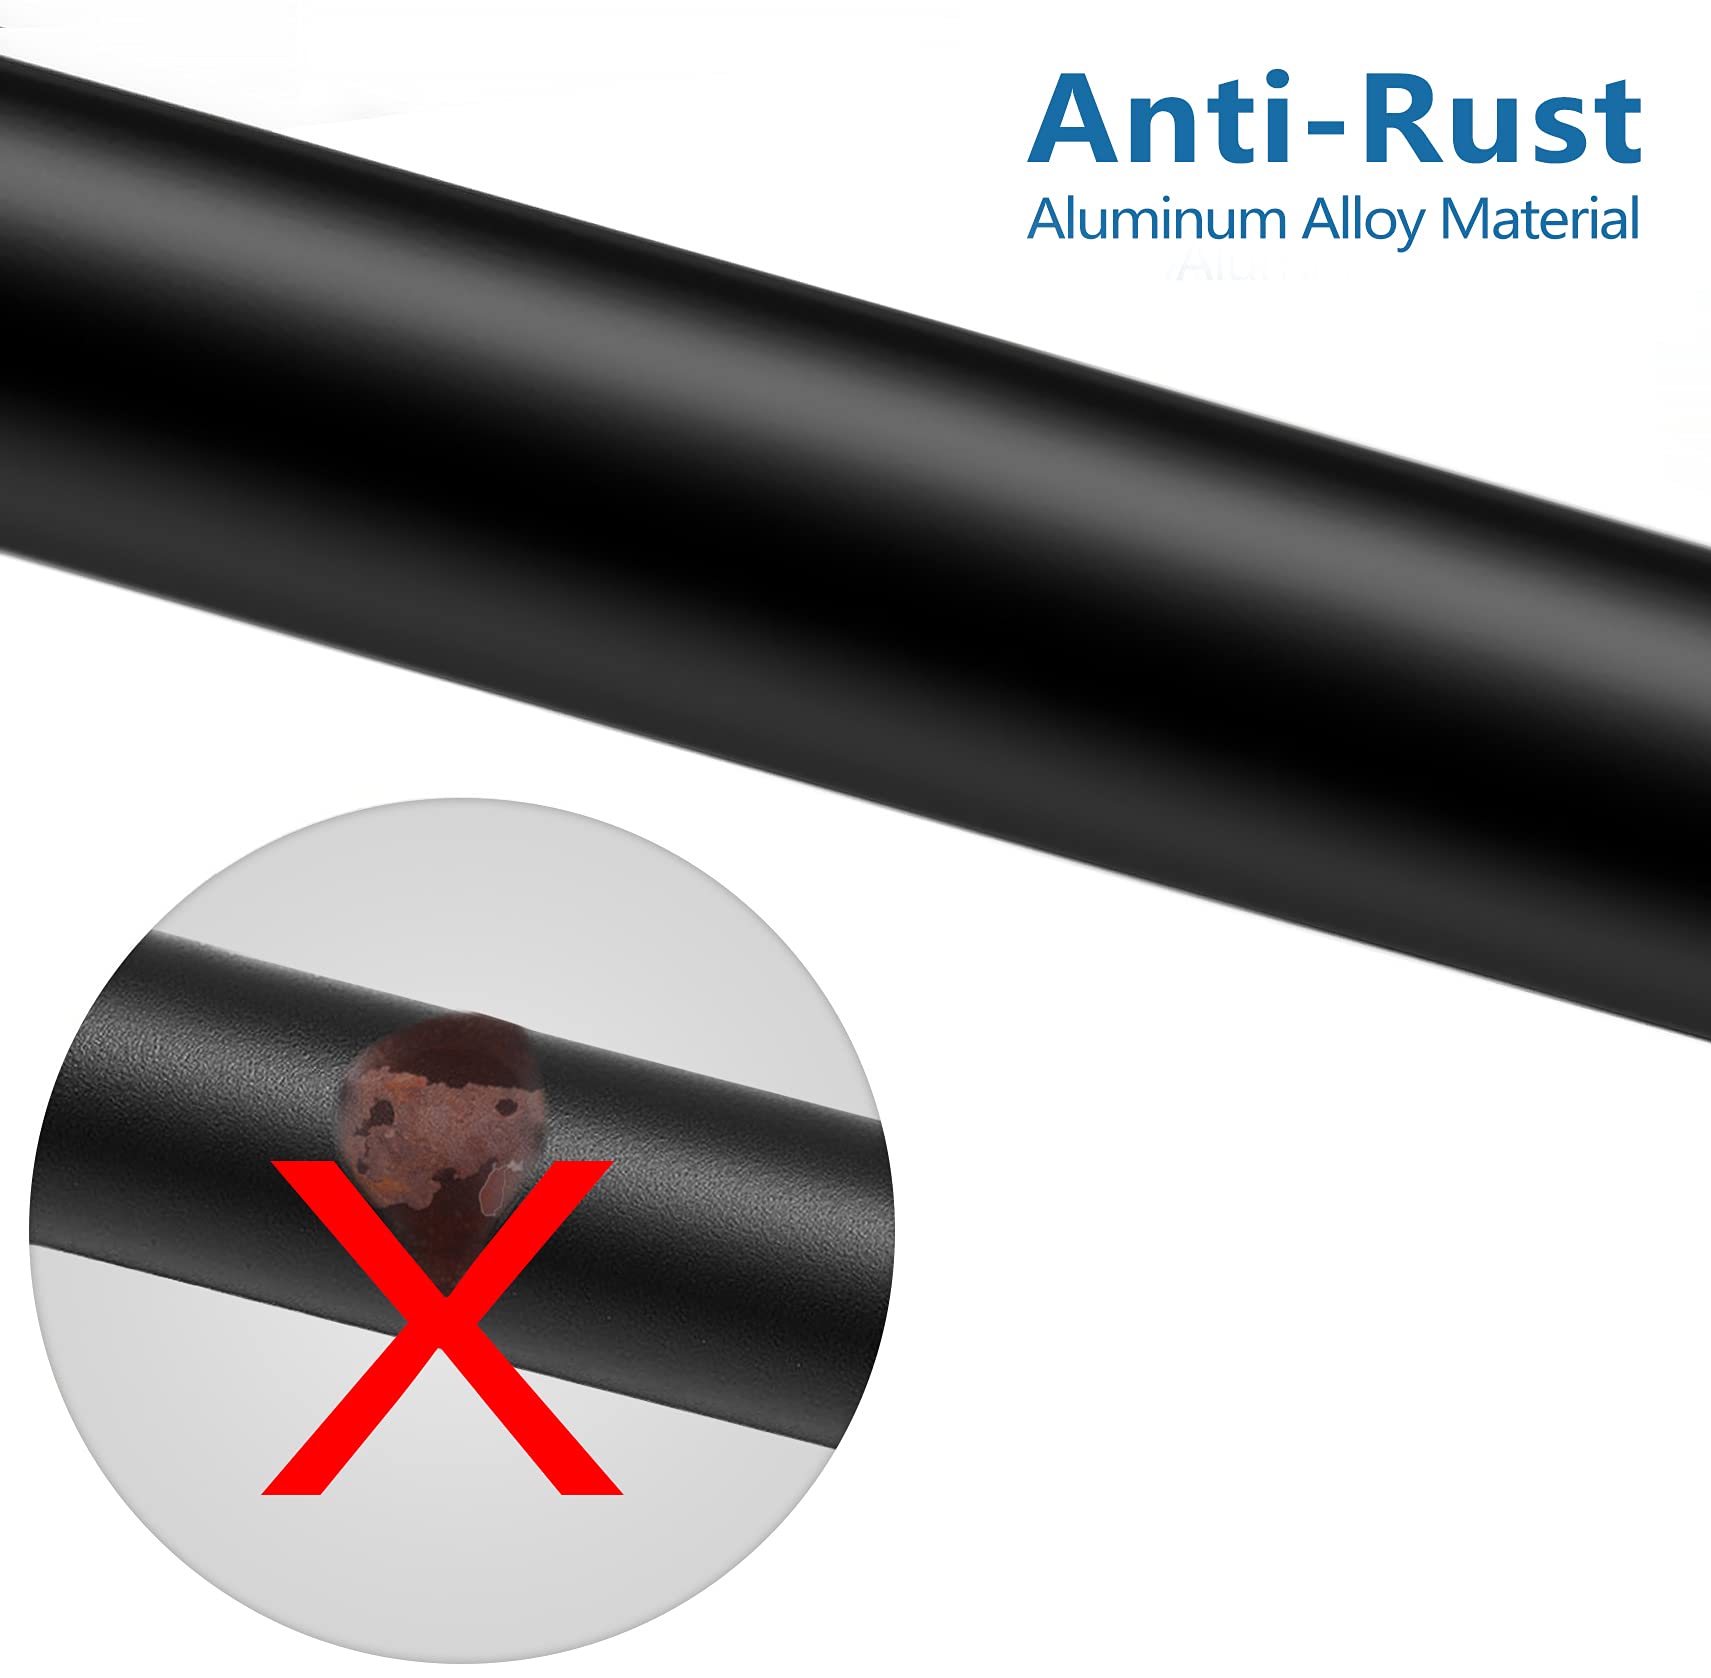 Rust Free and Adjustable Tension Outdoor Curtain Rod for Bathroom, Kitchen, Closet, Windows KGORGE Store